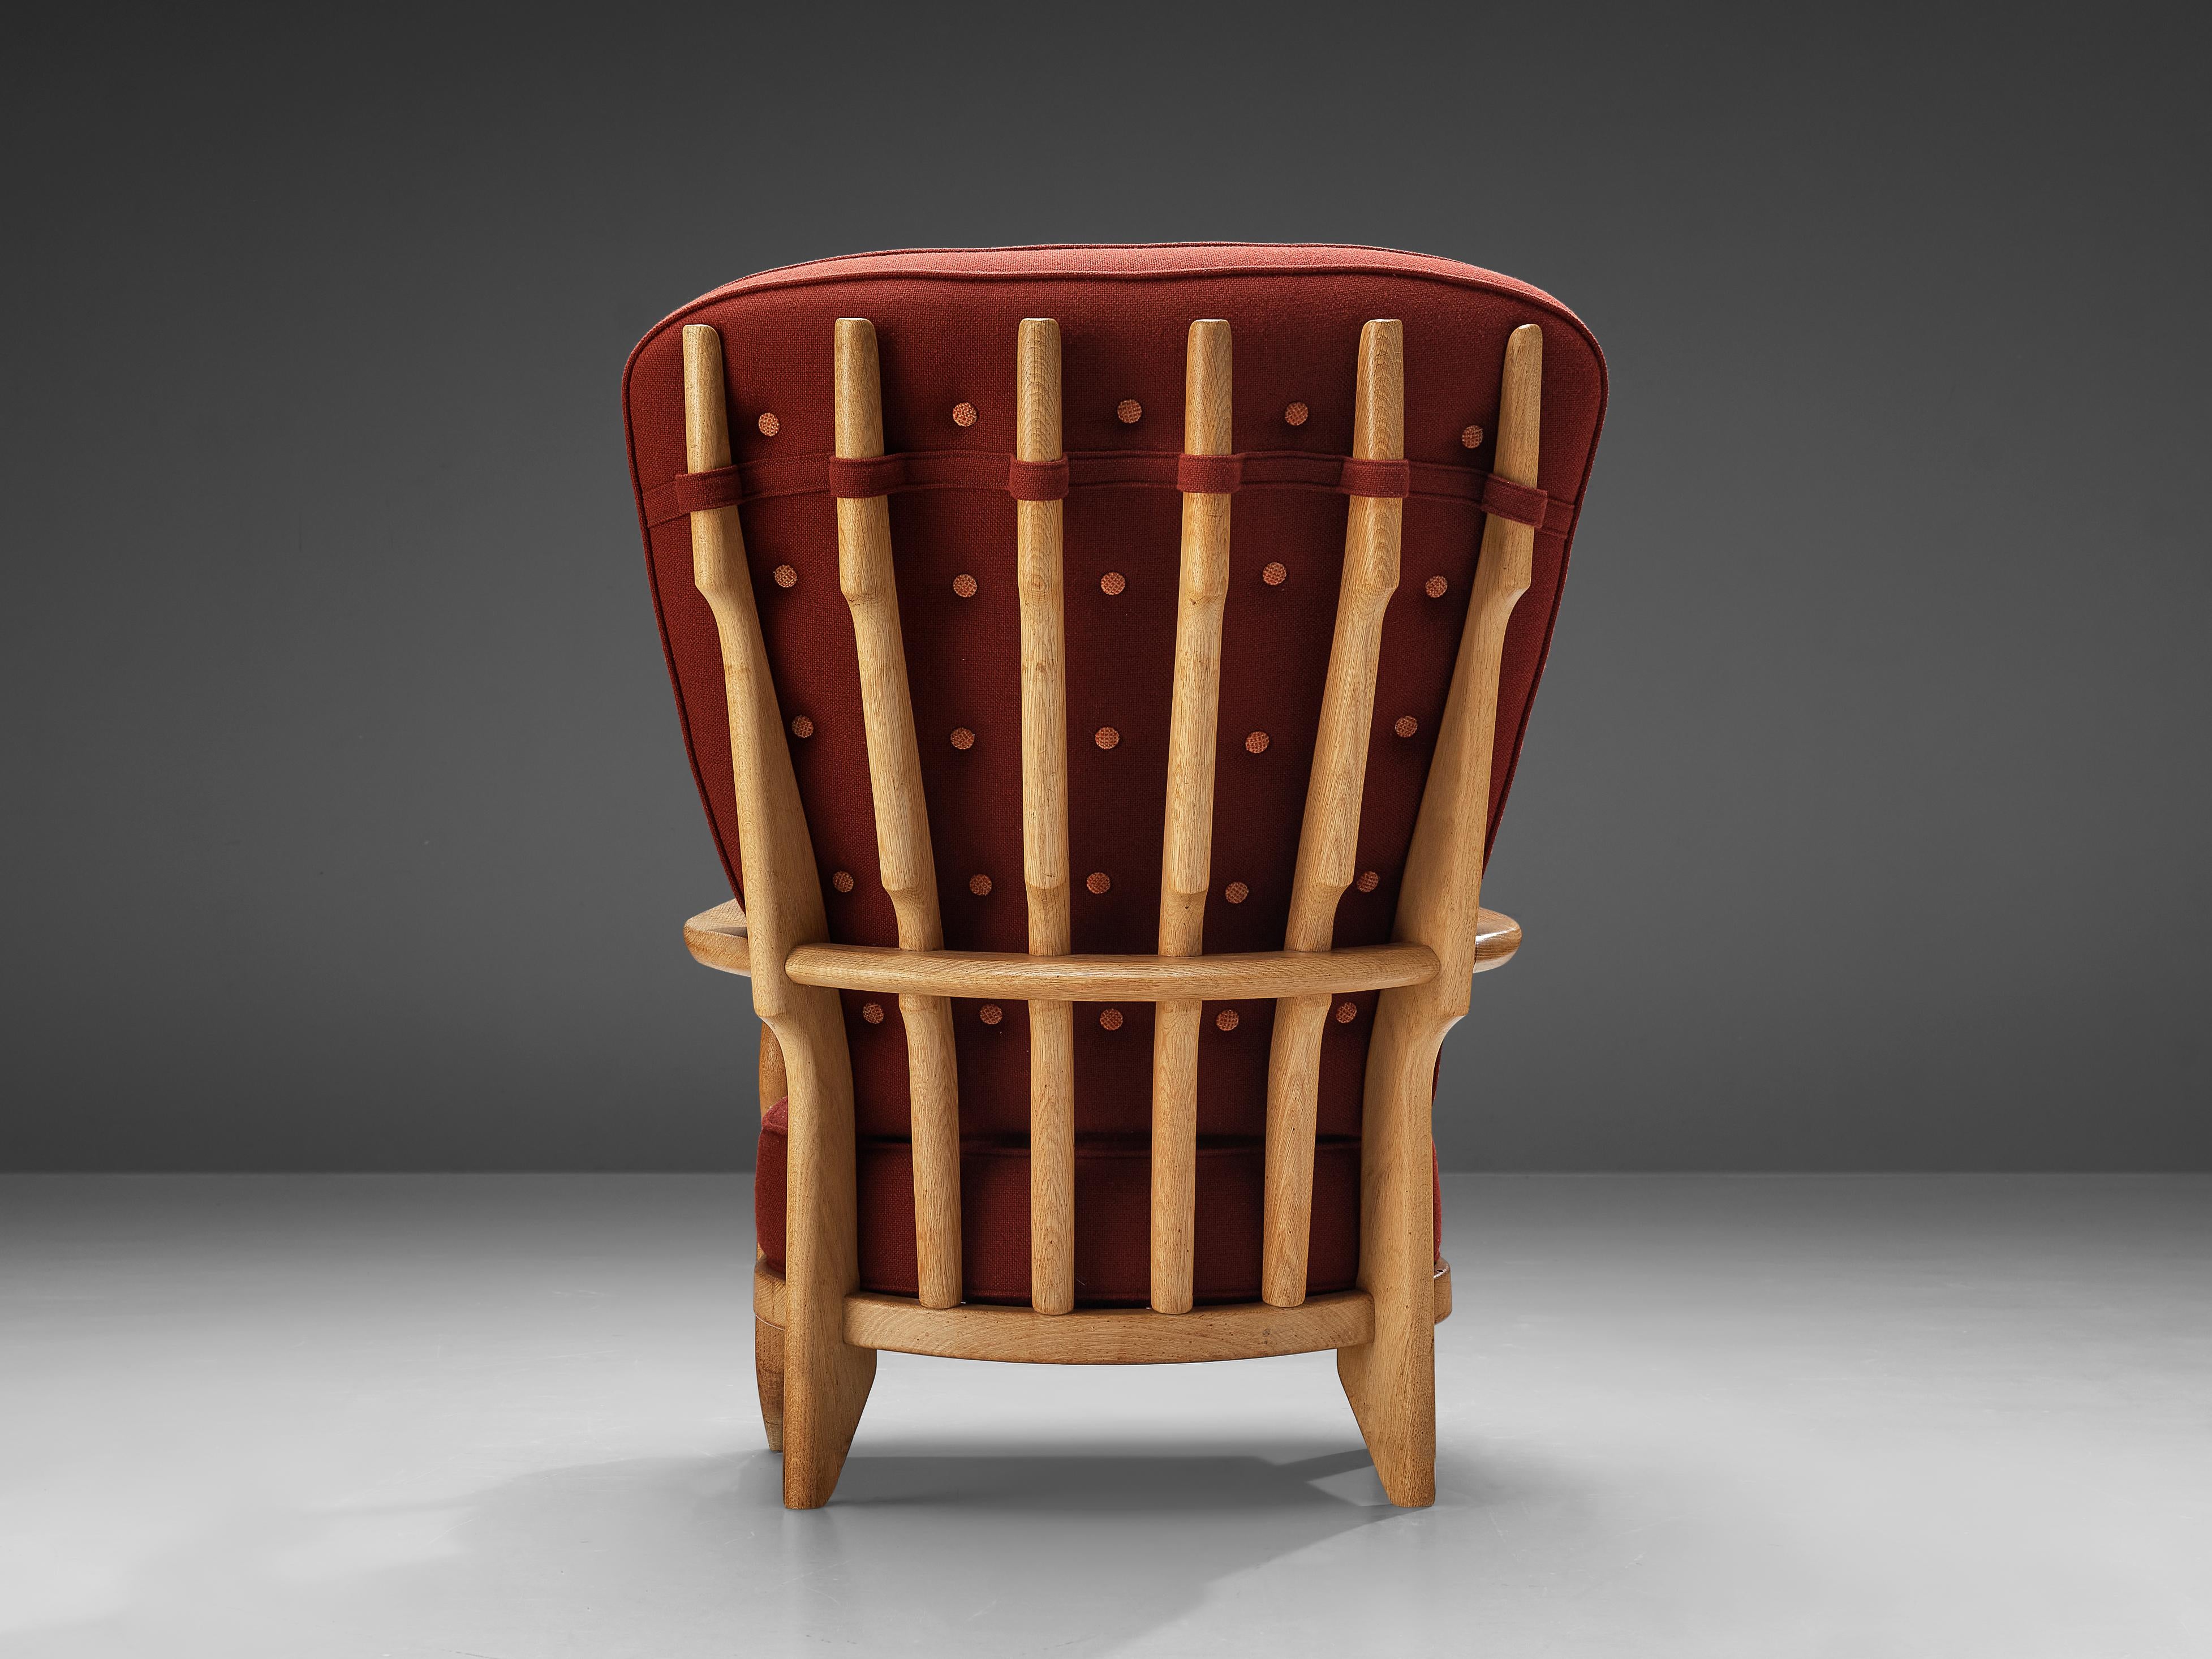 Guillerme & Chambron 'Grand Repos' Lounge Chair in Red Upholstery and Oak